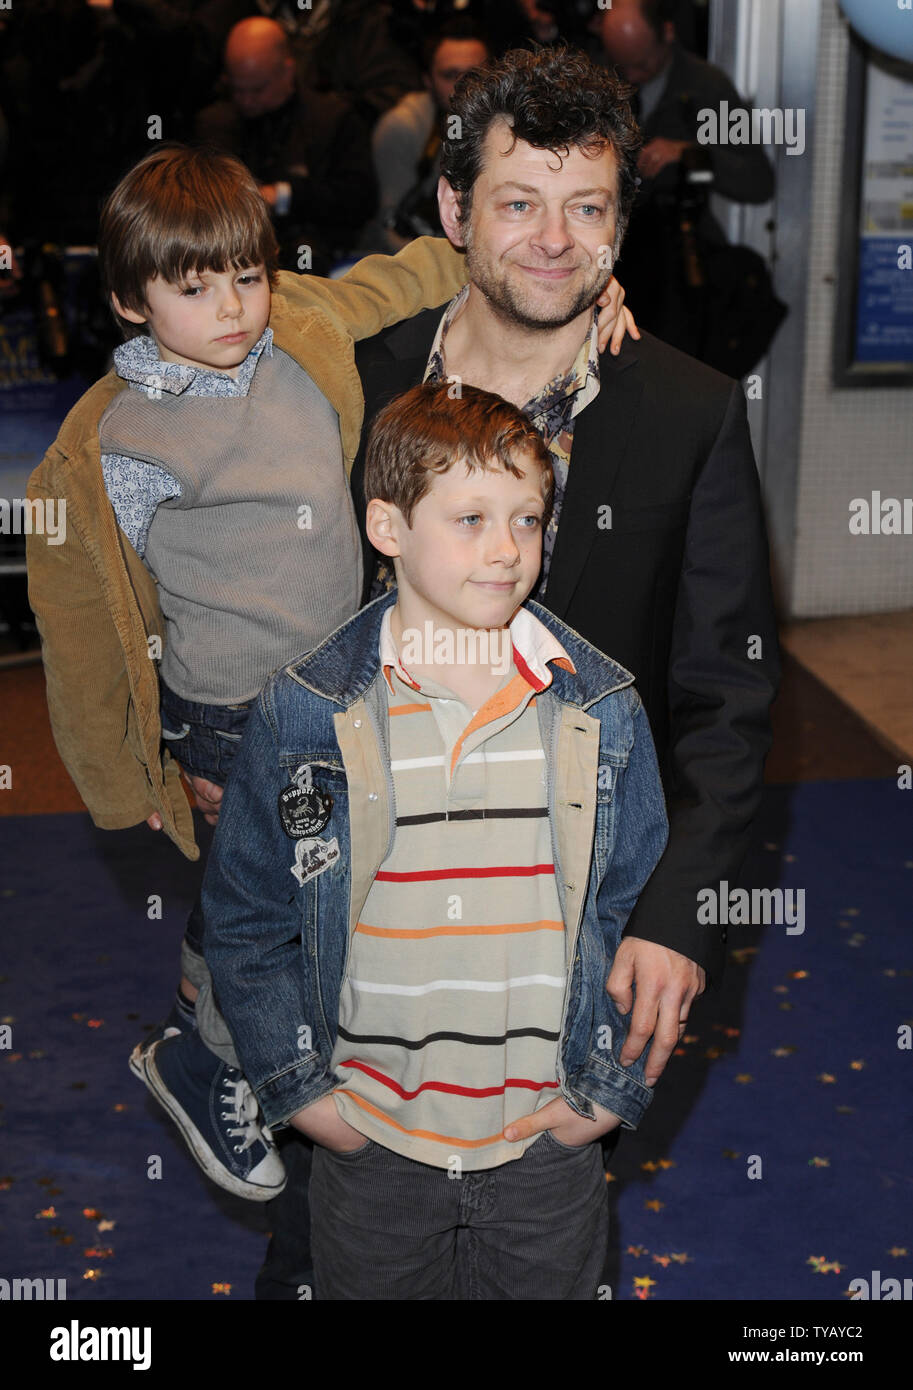 British actor Andy Serkis and family attend the premiere of 